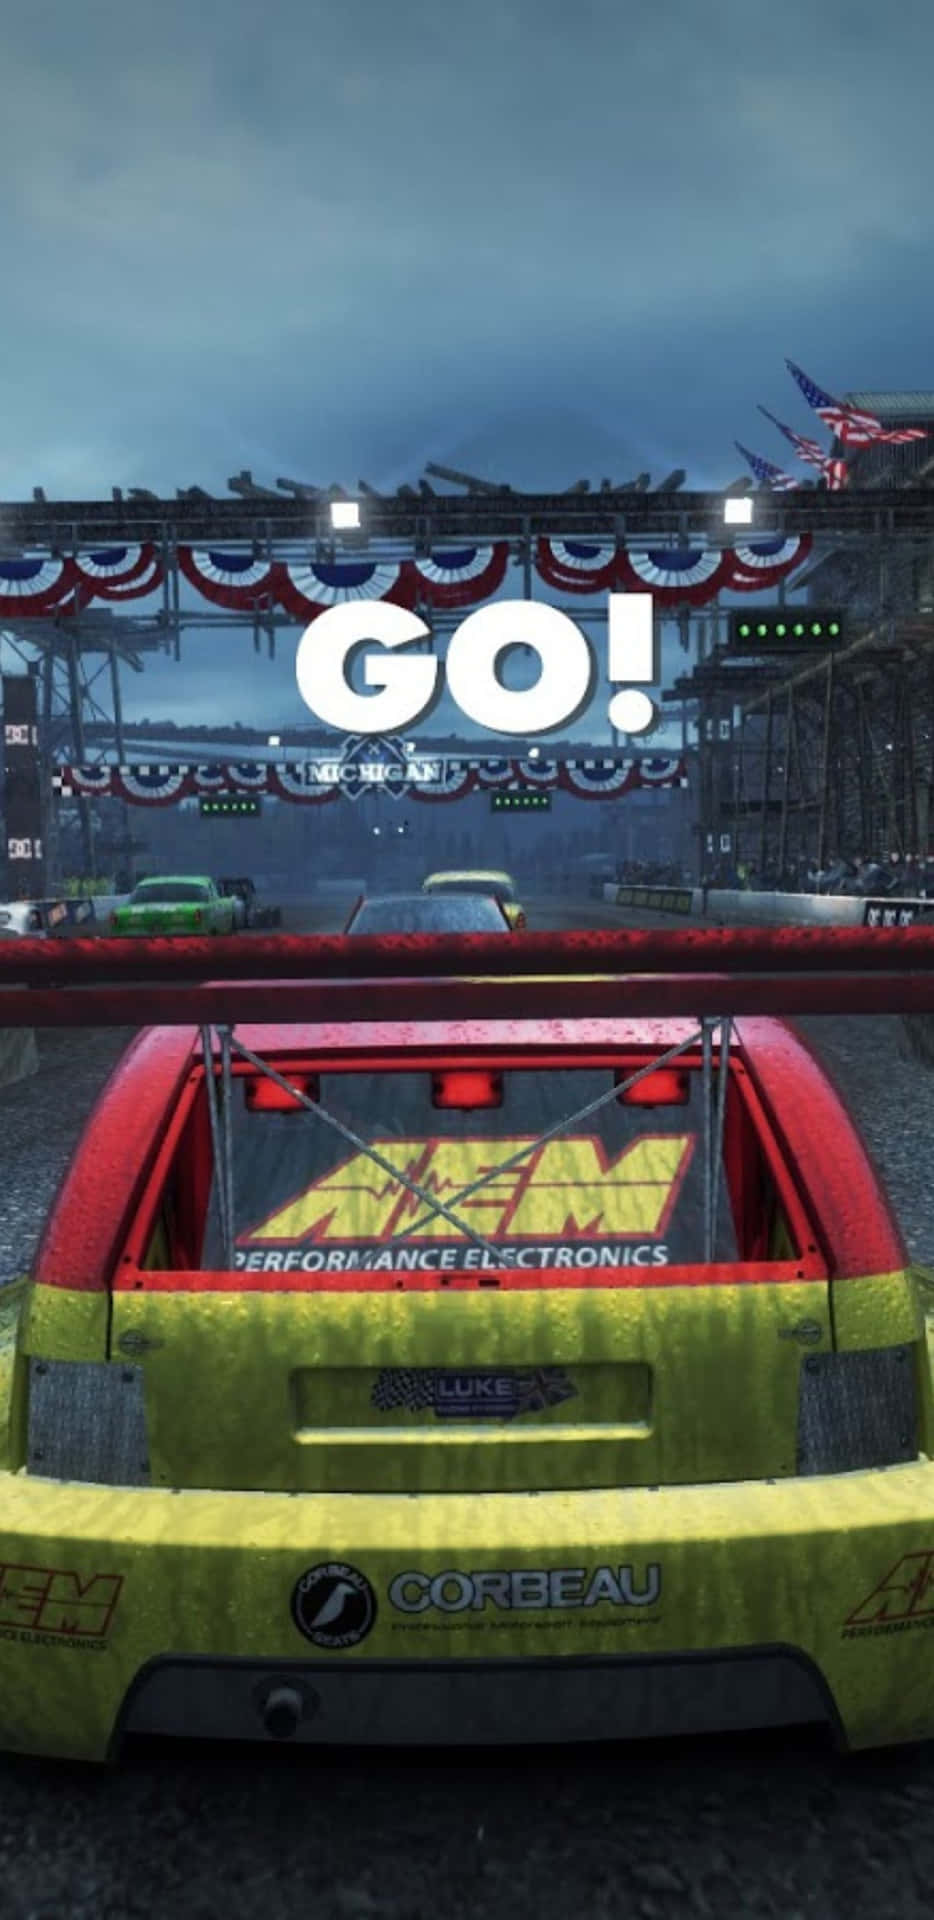 A Screenshot Of A Racing Game With A Car And Flag